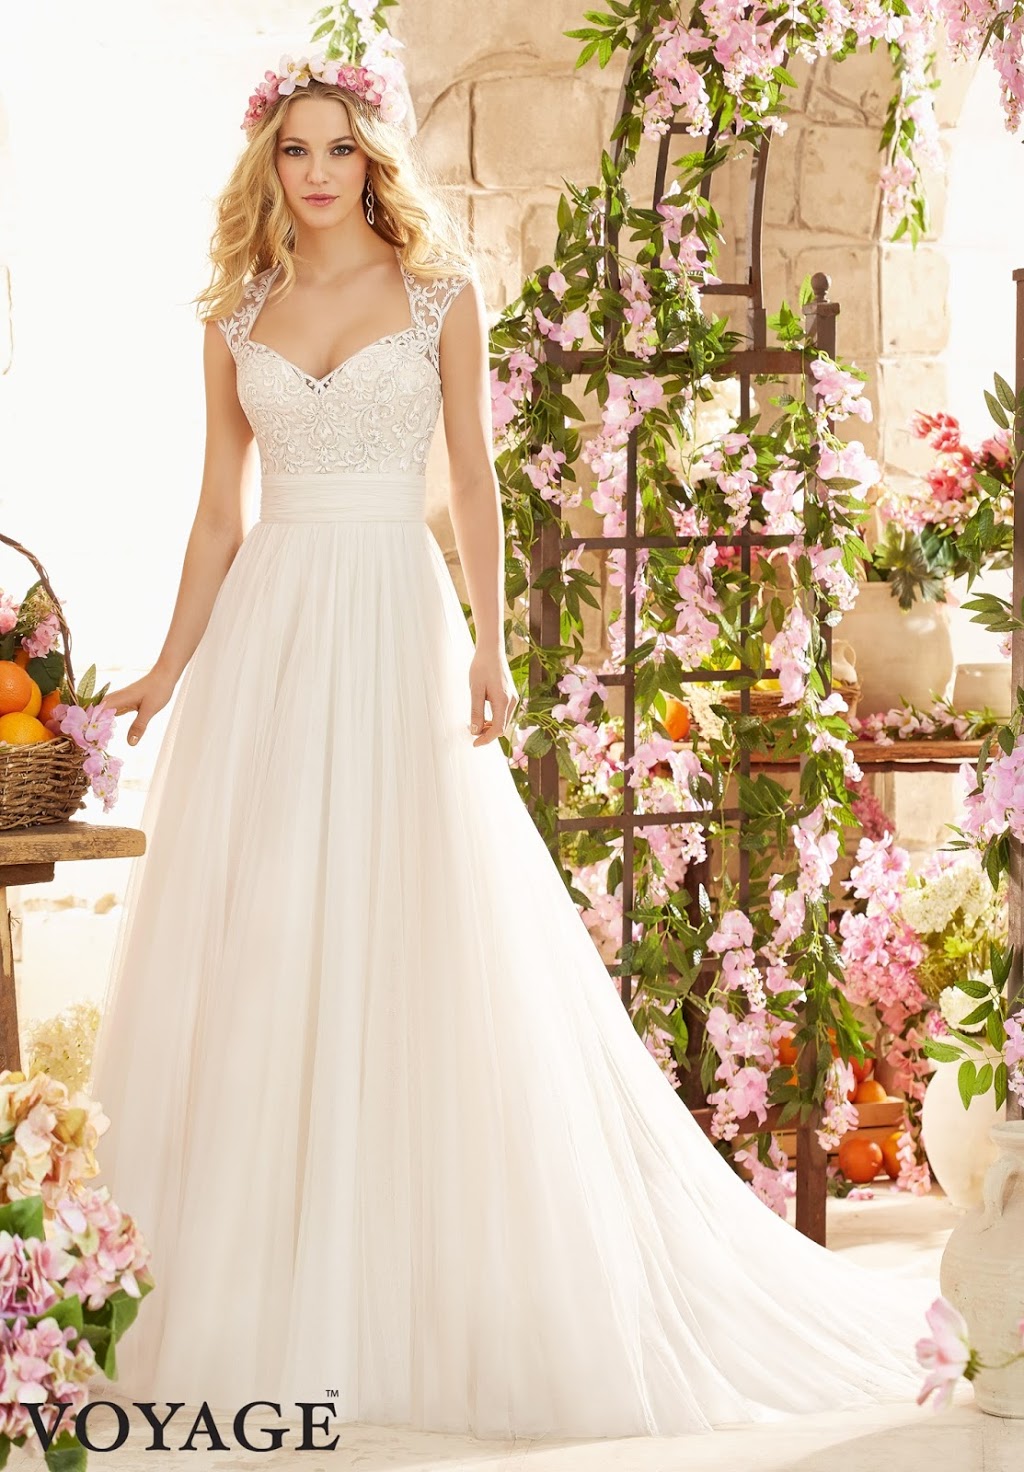 Perfect Day Bridal | clothing store | 684 Willoughby Rd, Willoughby NSW 2068, Australia | 0299588873 OR +61 2 9958 8873